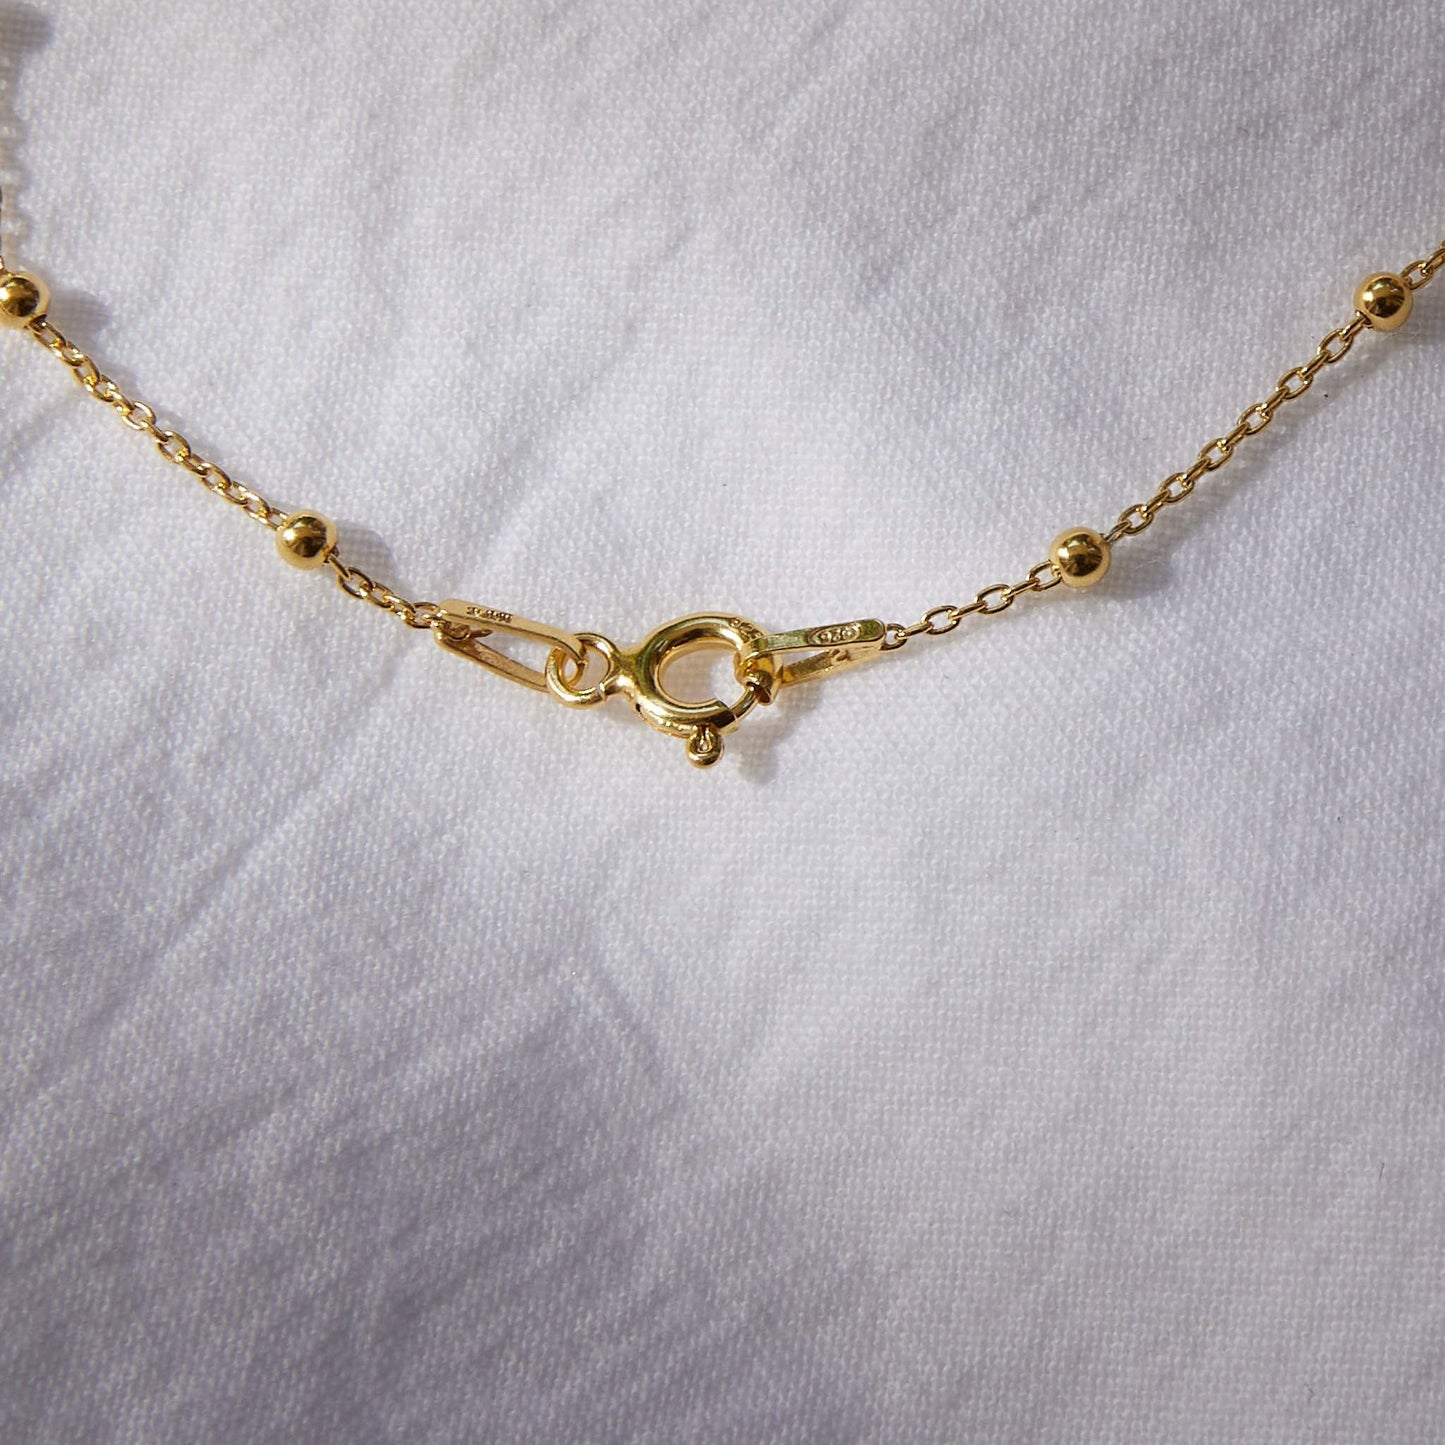 Wave pendant on 24k Gold plated sterling silver ball chain